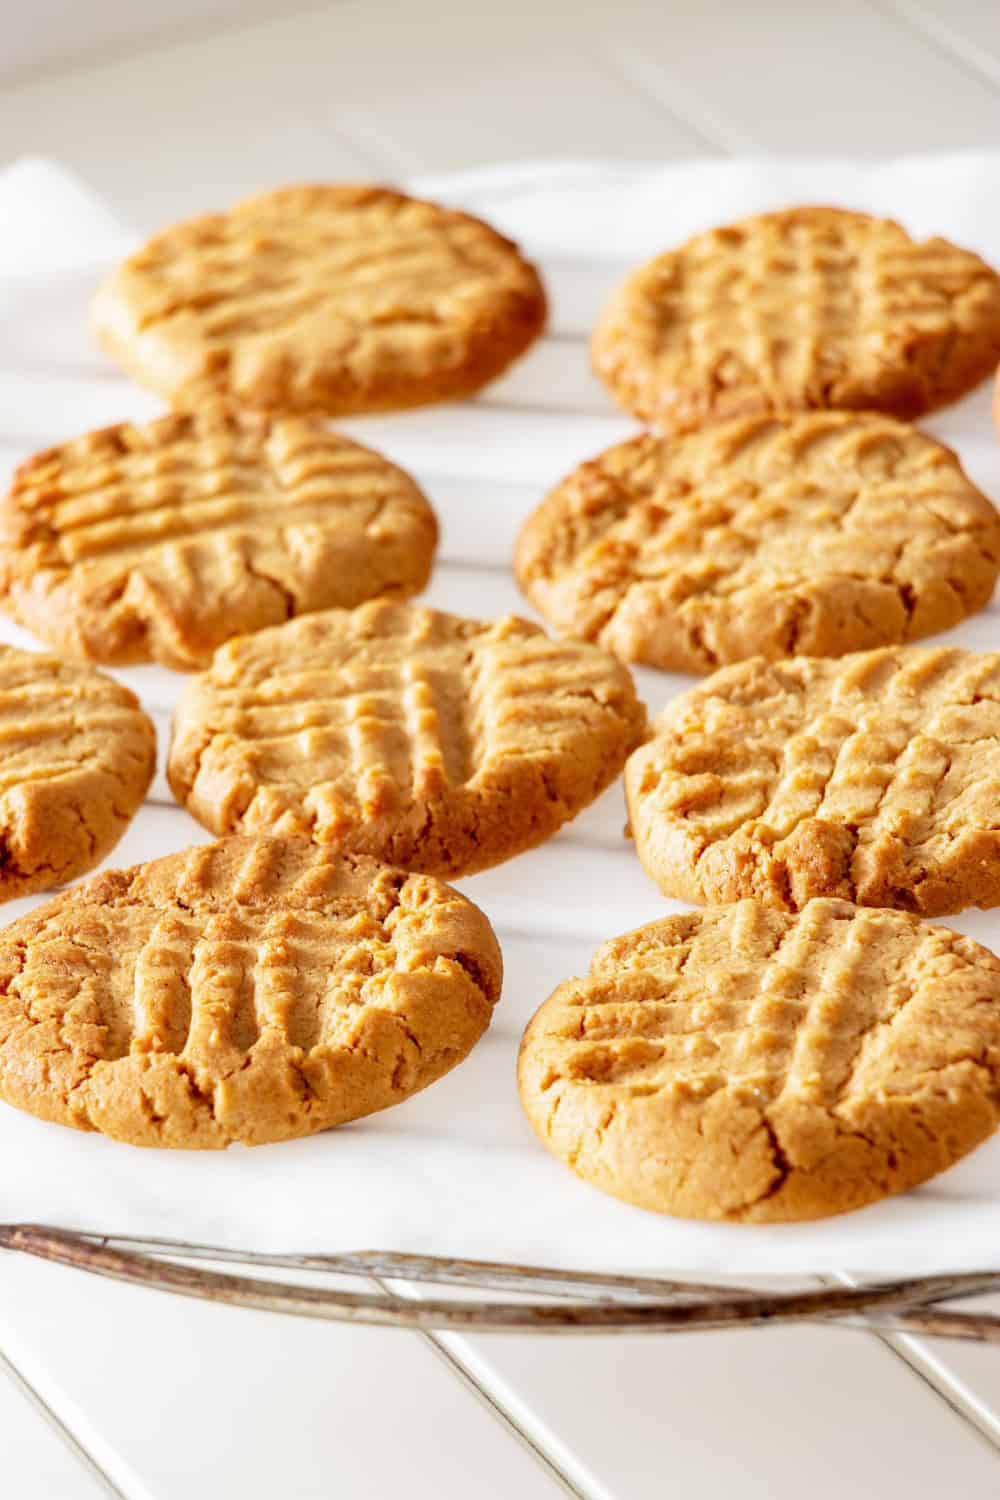 Keto Peanut butter Cookies Beautiful Keto Peanut butter Cookies with Almond Flour · Fittoserve